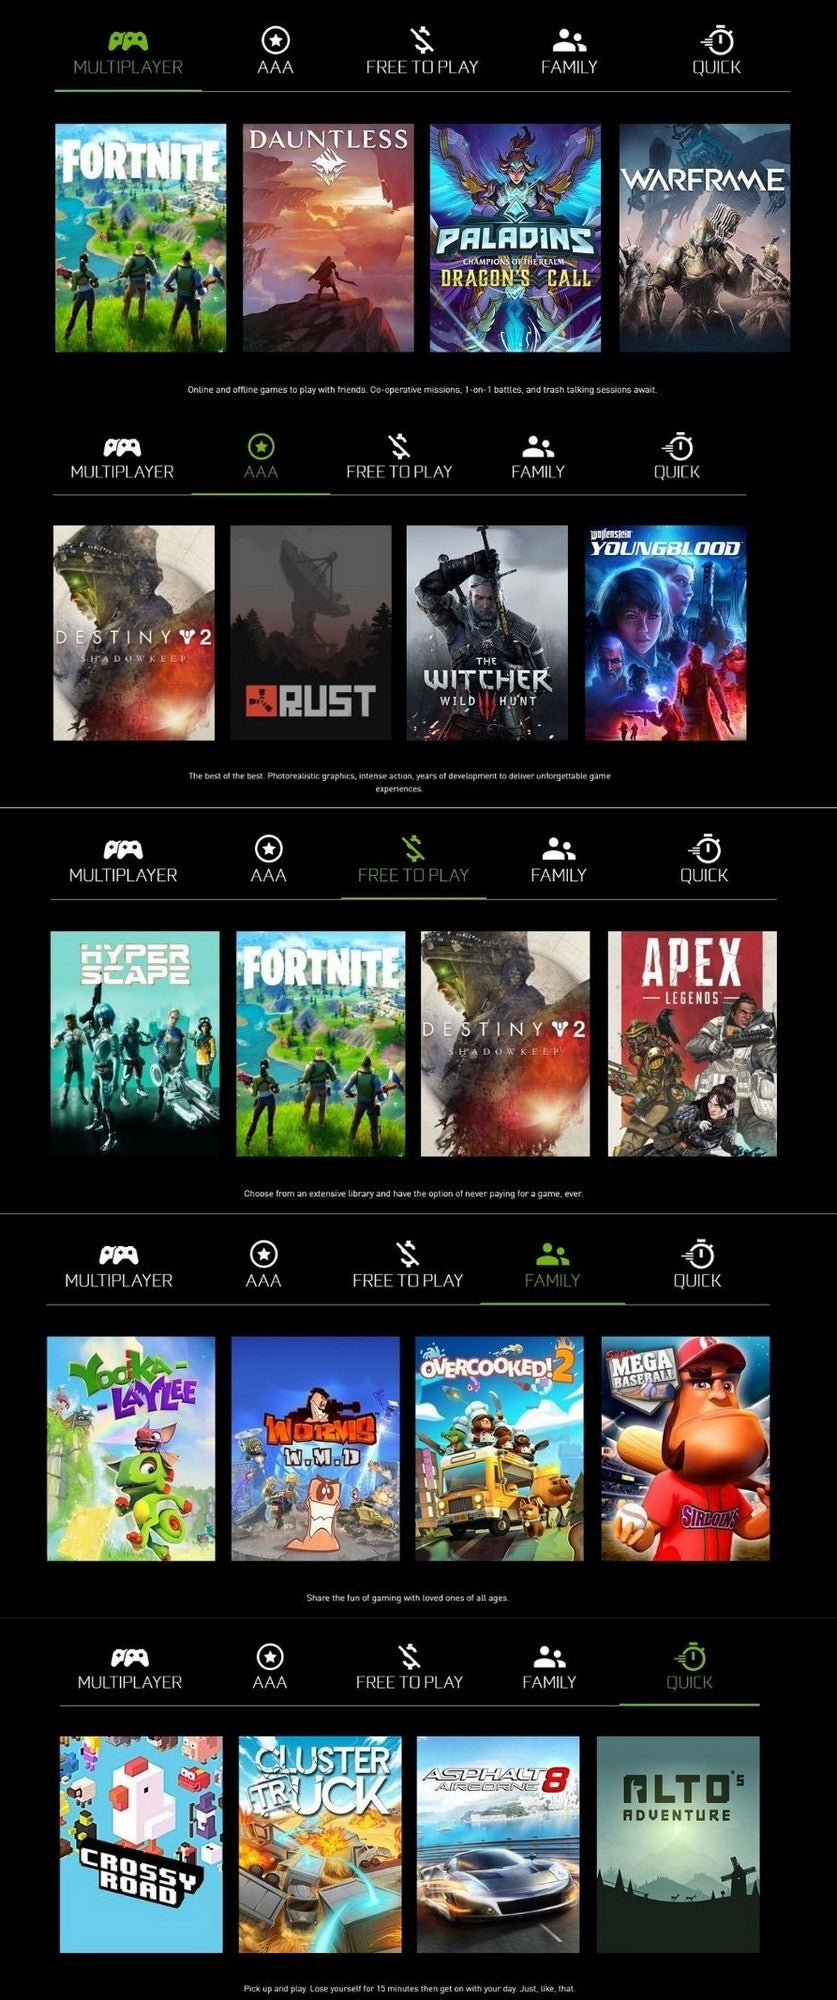 NVIDIA SHIELD Android TV 4K HDR Streaming Media Player; High Performance, Dolby Vision, Google Assistant Built-In, Works with Alexa - gaming